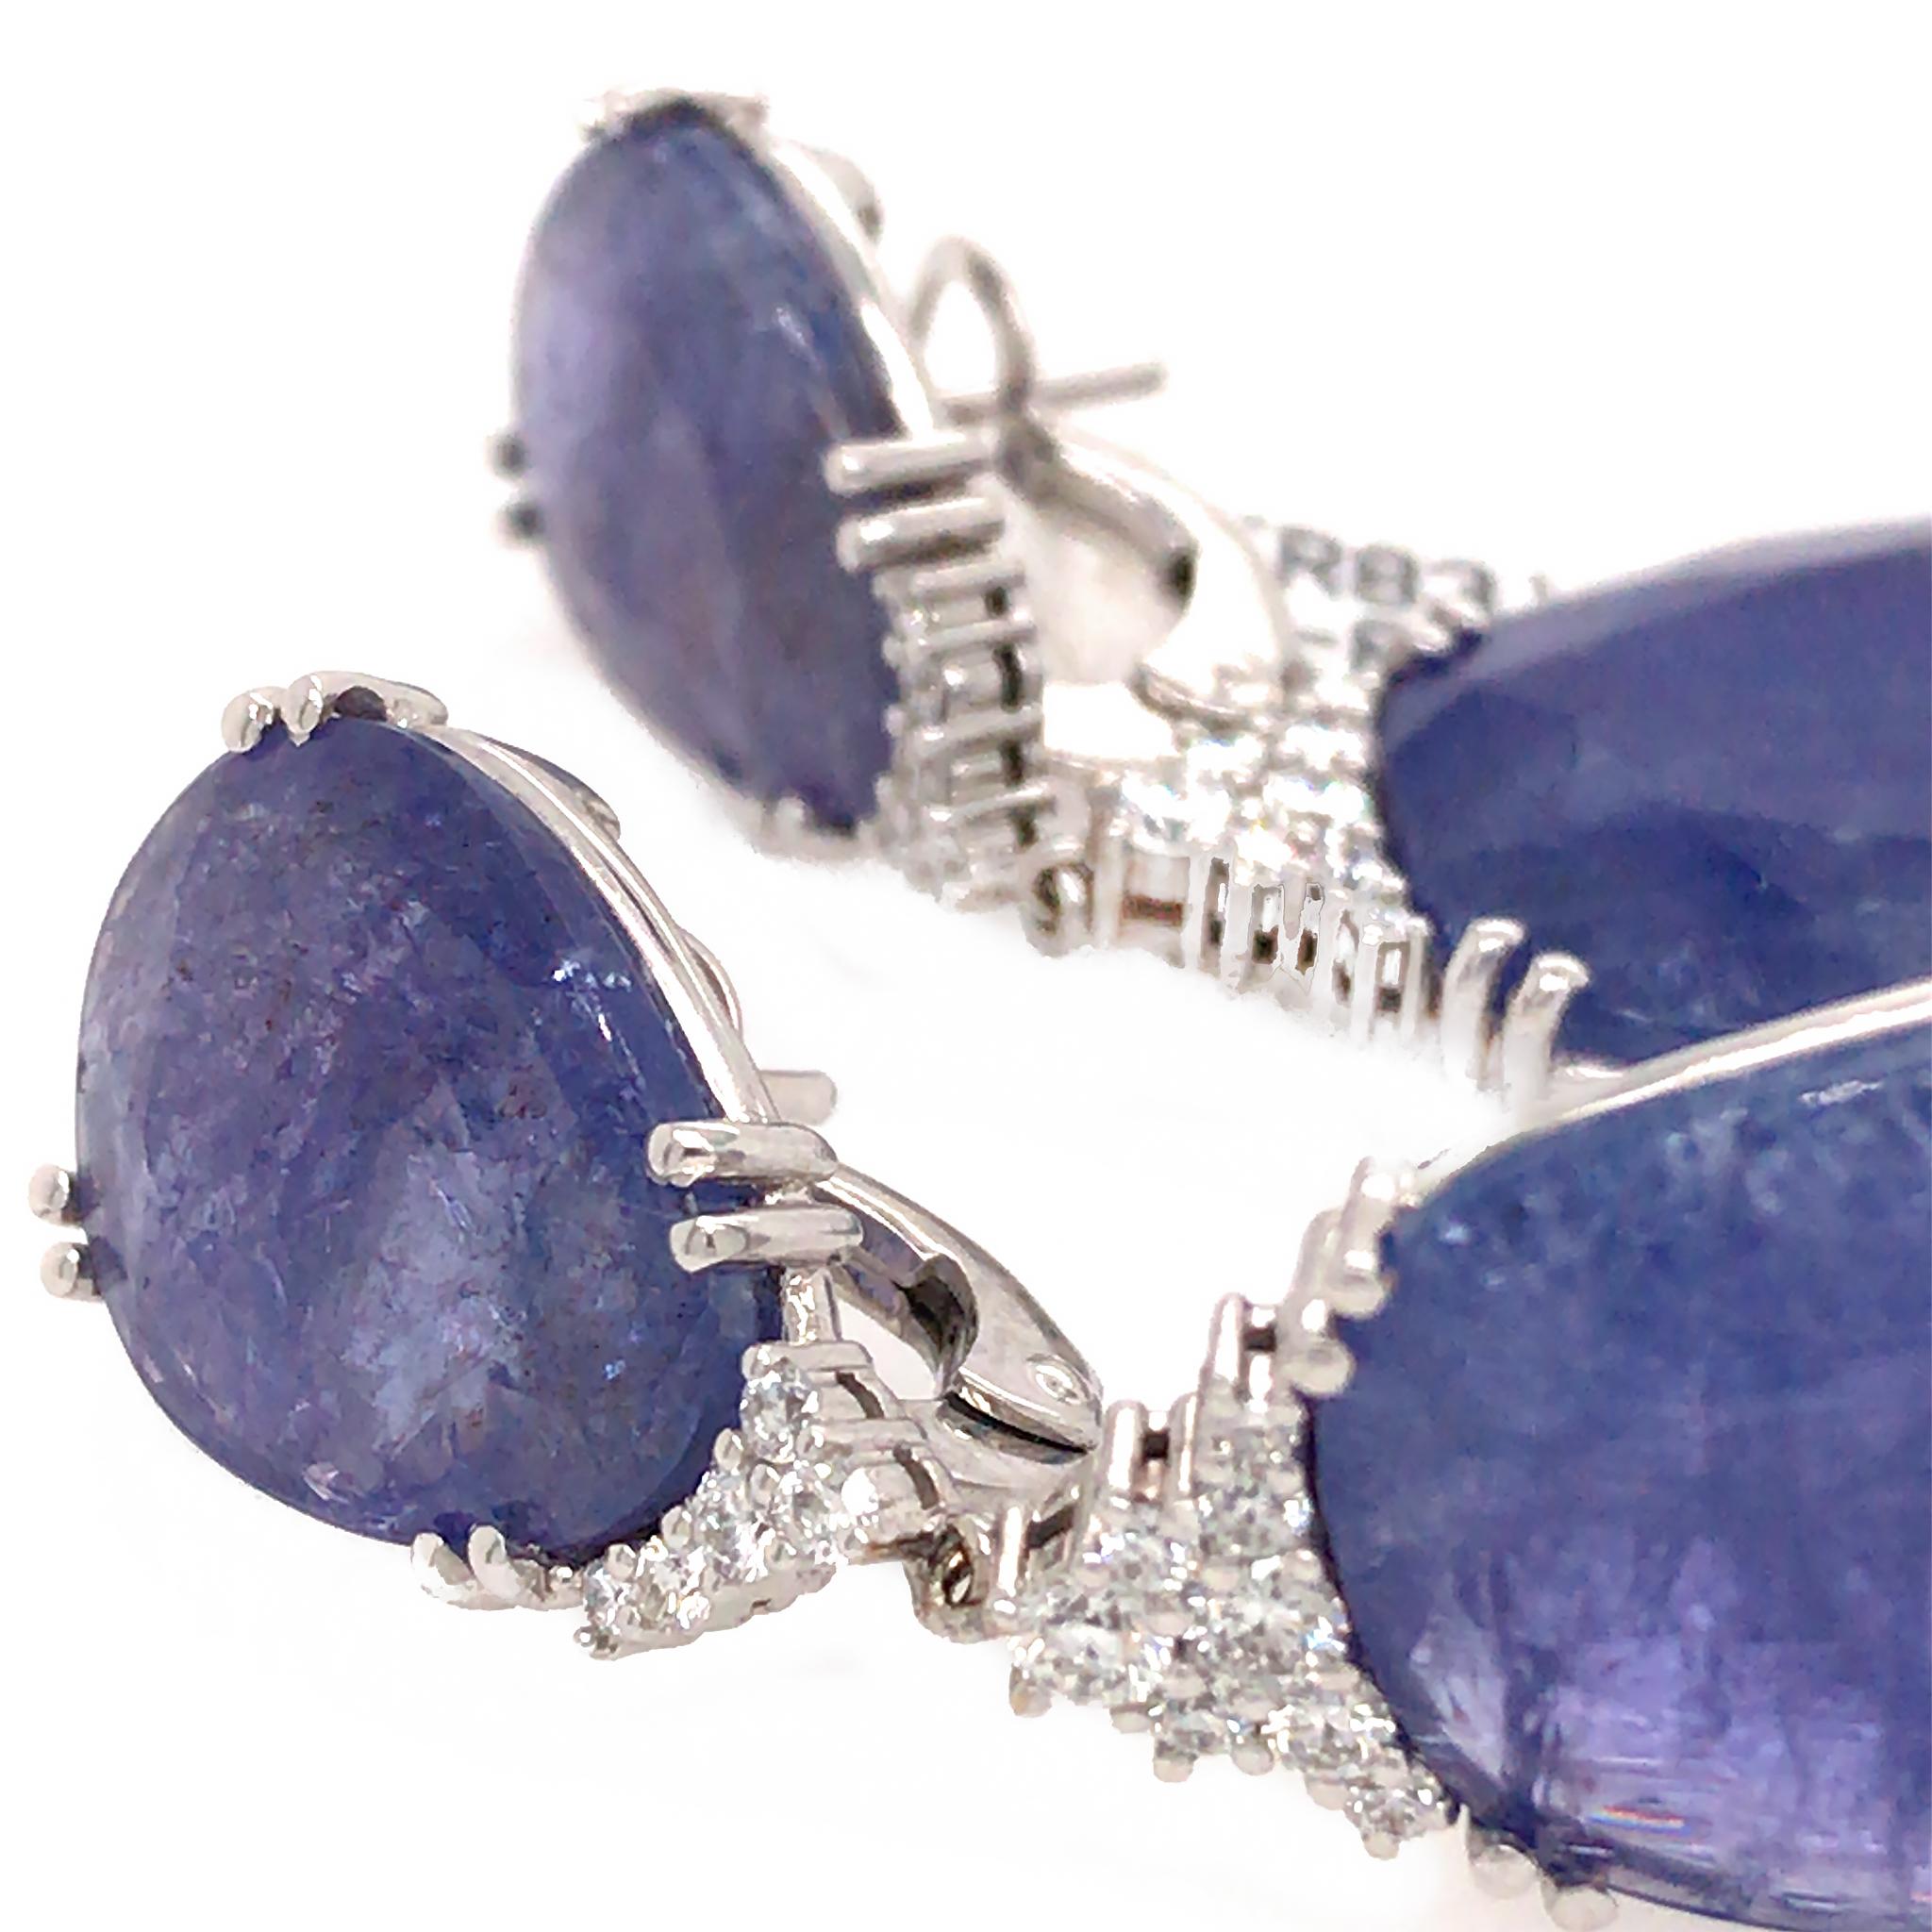 18k White Gold
Diamond: 0.55 ct twd (estimated)
Tanzanite: 52.99 tcw
Length: 2 inches
Total Weight: 19 grams